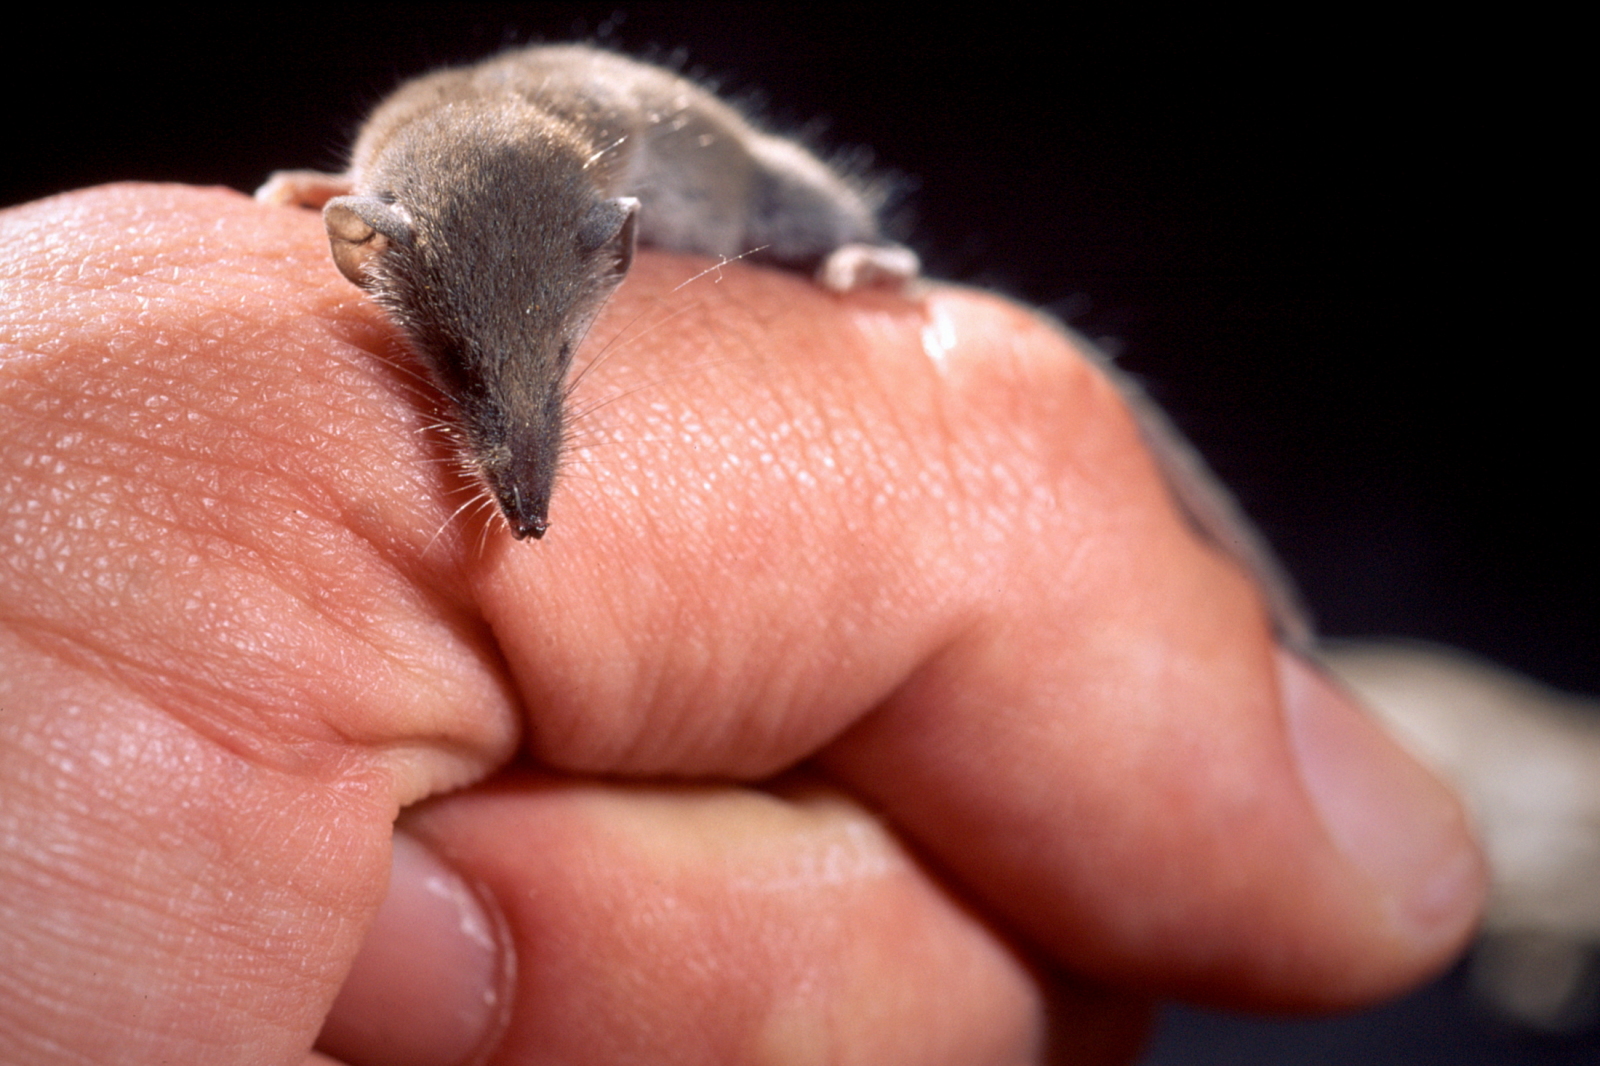 What is the smallest mammal?